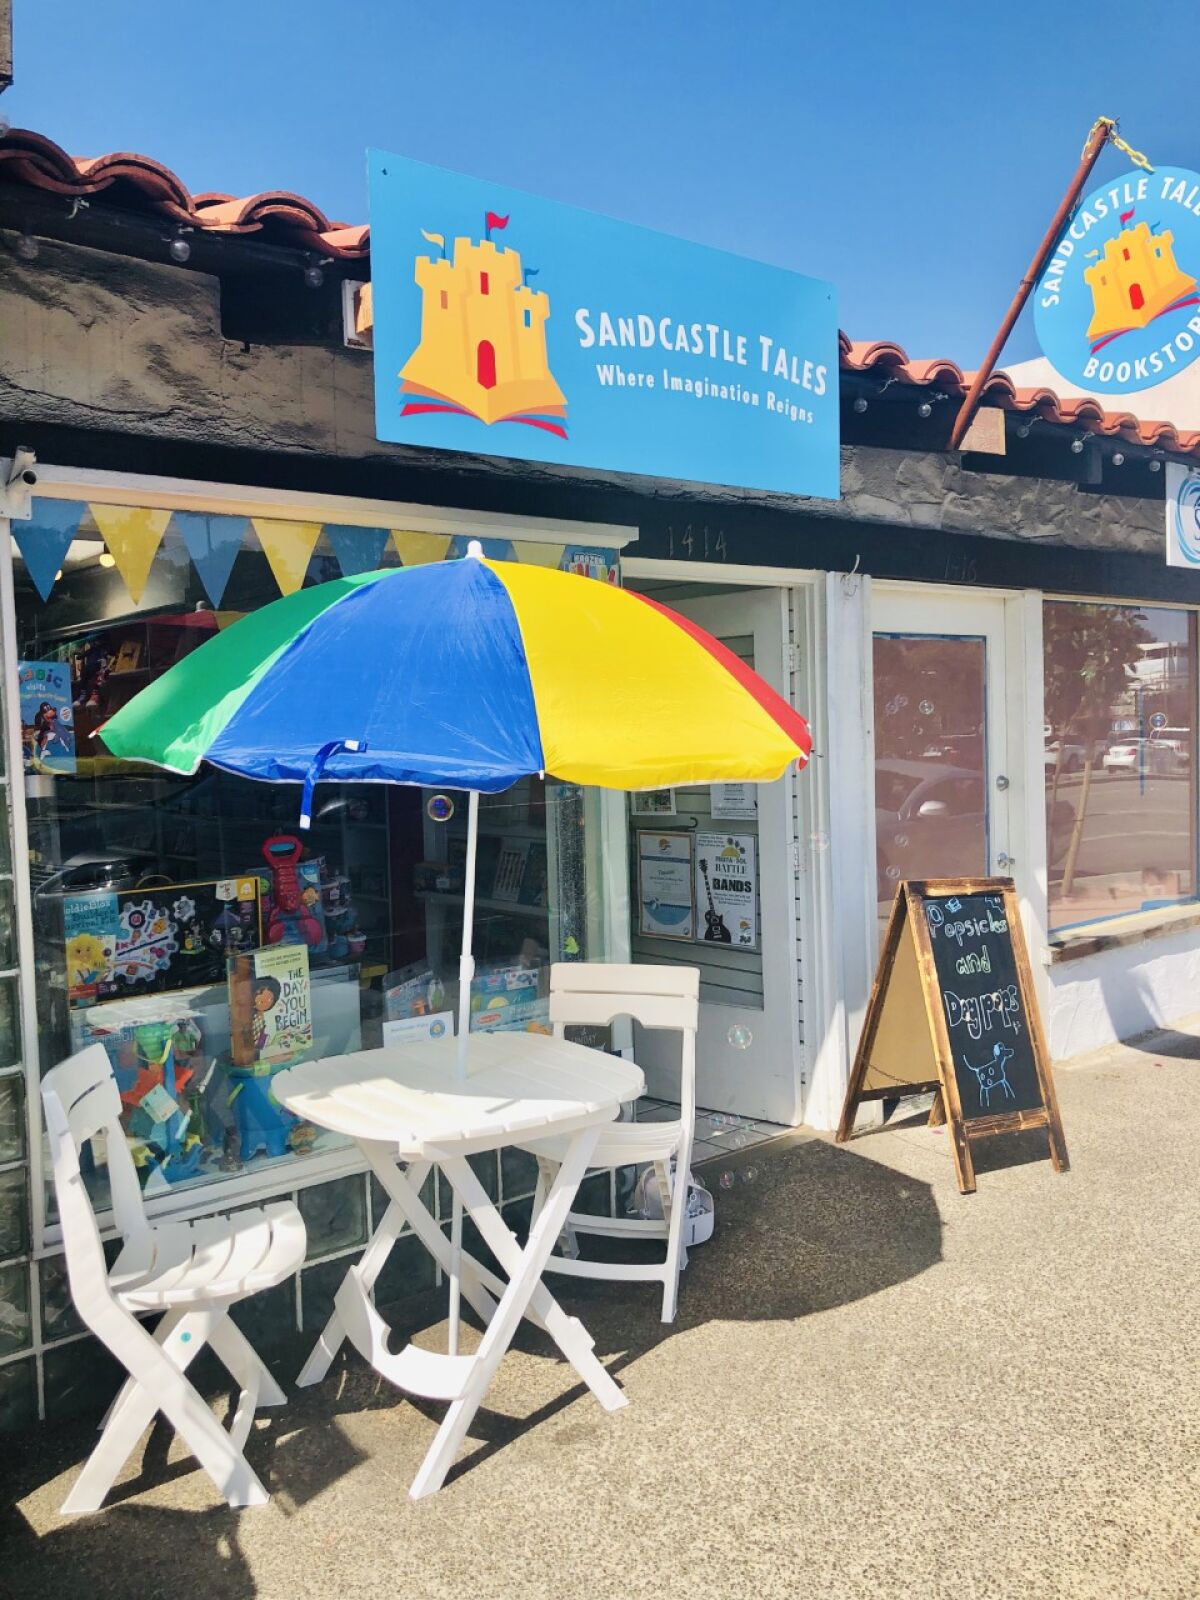 Sandcastle Tales will hold a Grand Opening event on Saturday Nov. 9, from 2 p.m. to 4 p.m., at 1414 Camino del Mar.